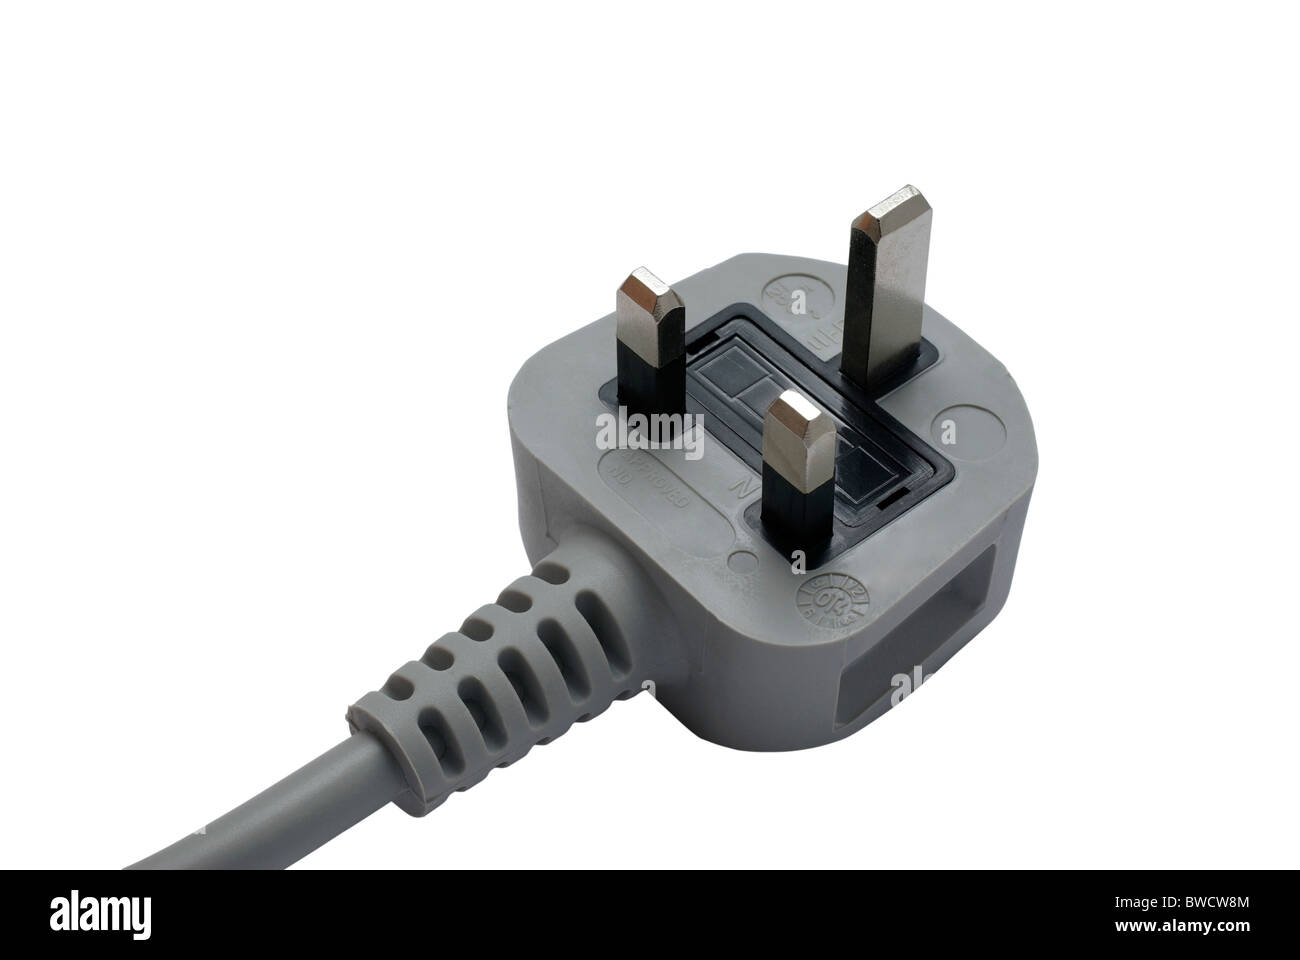 Electrical plug of power cable isolated on white background. Stock Photo